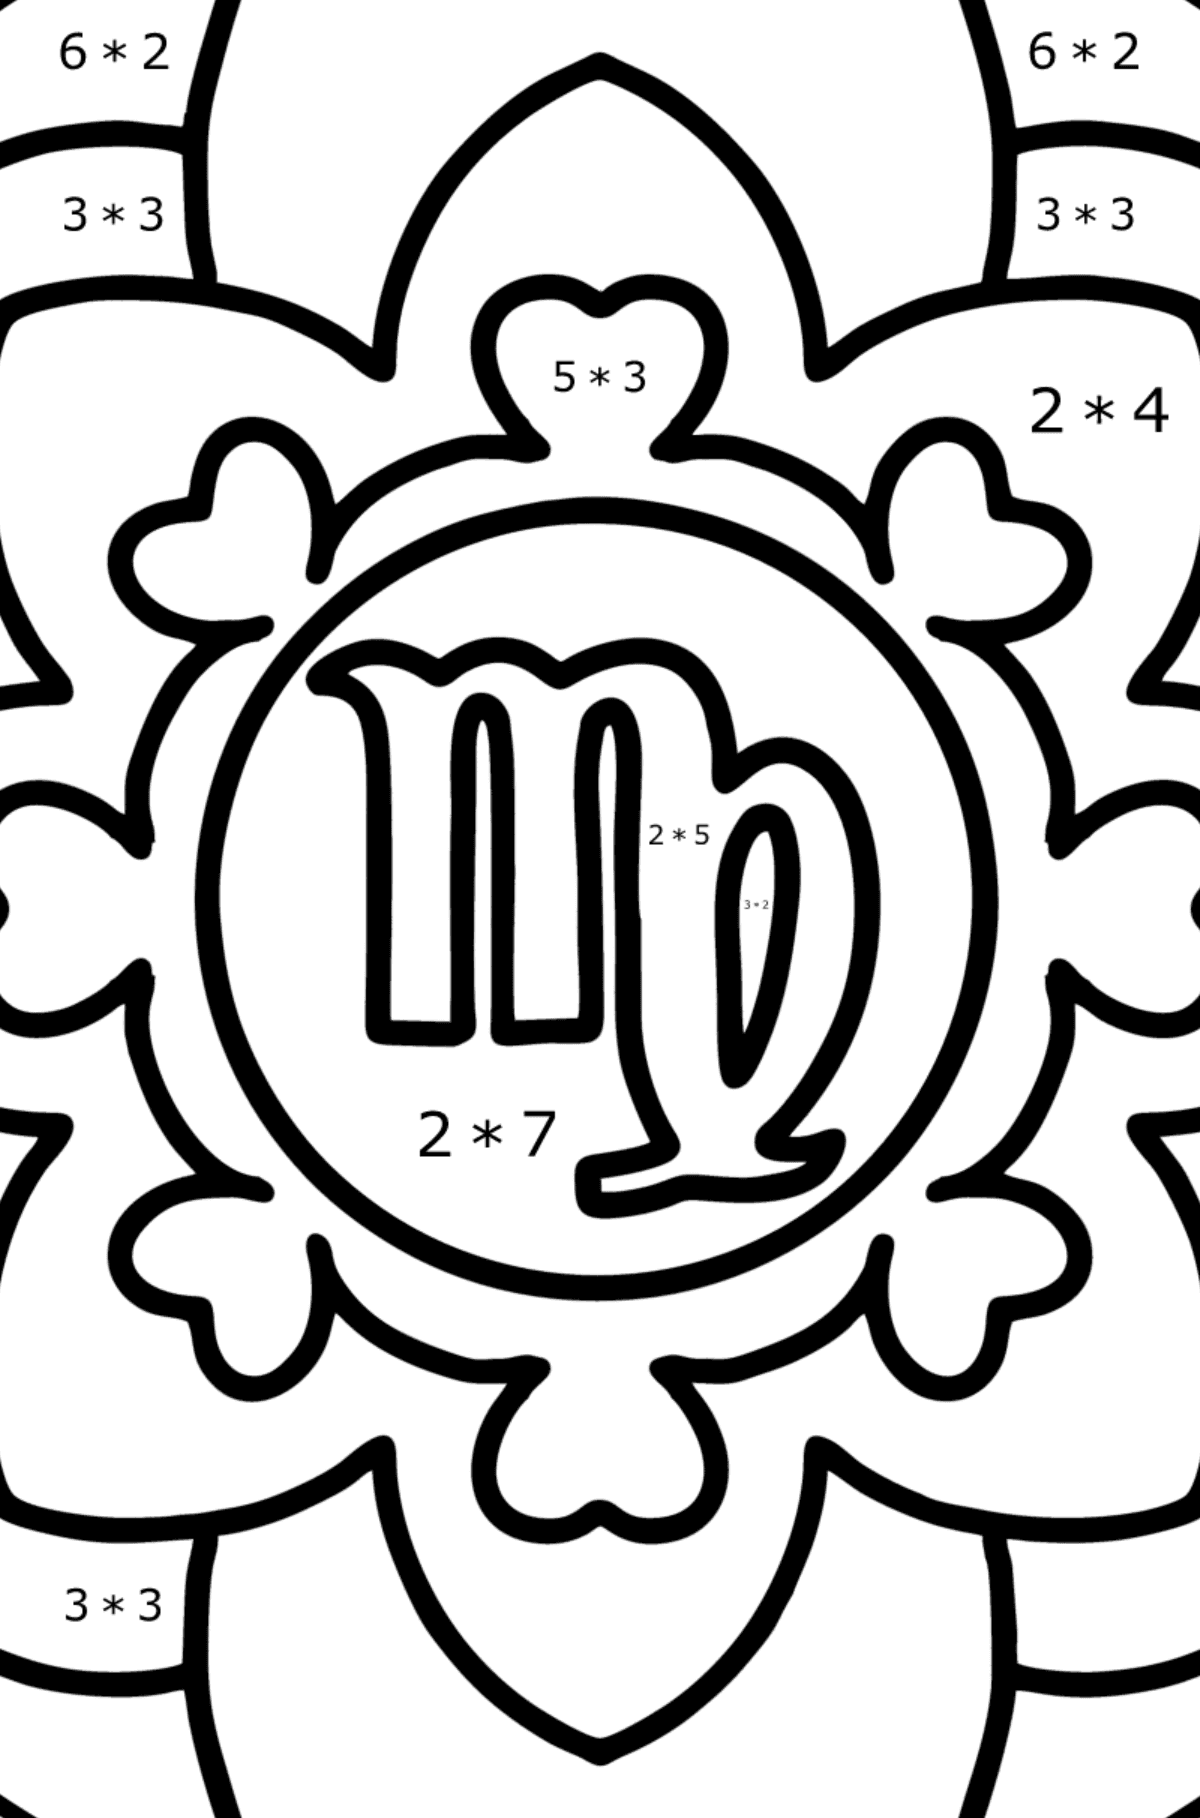 Coloring page - zodiac sign Virgo - Math Coloring - Multiplication for Kids